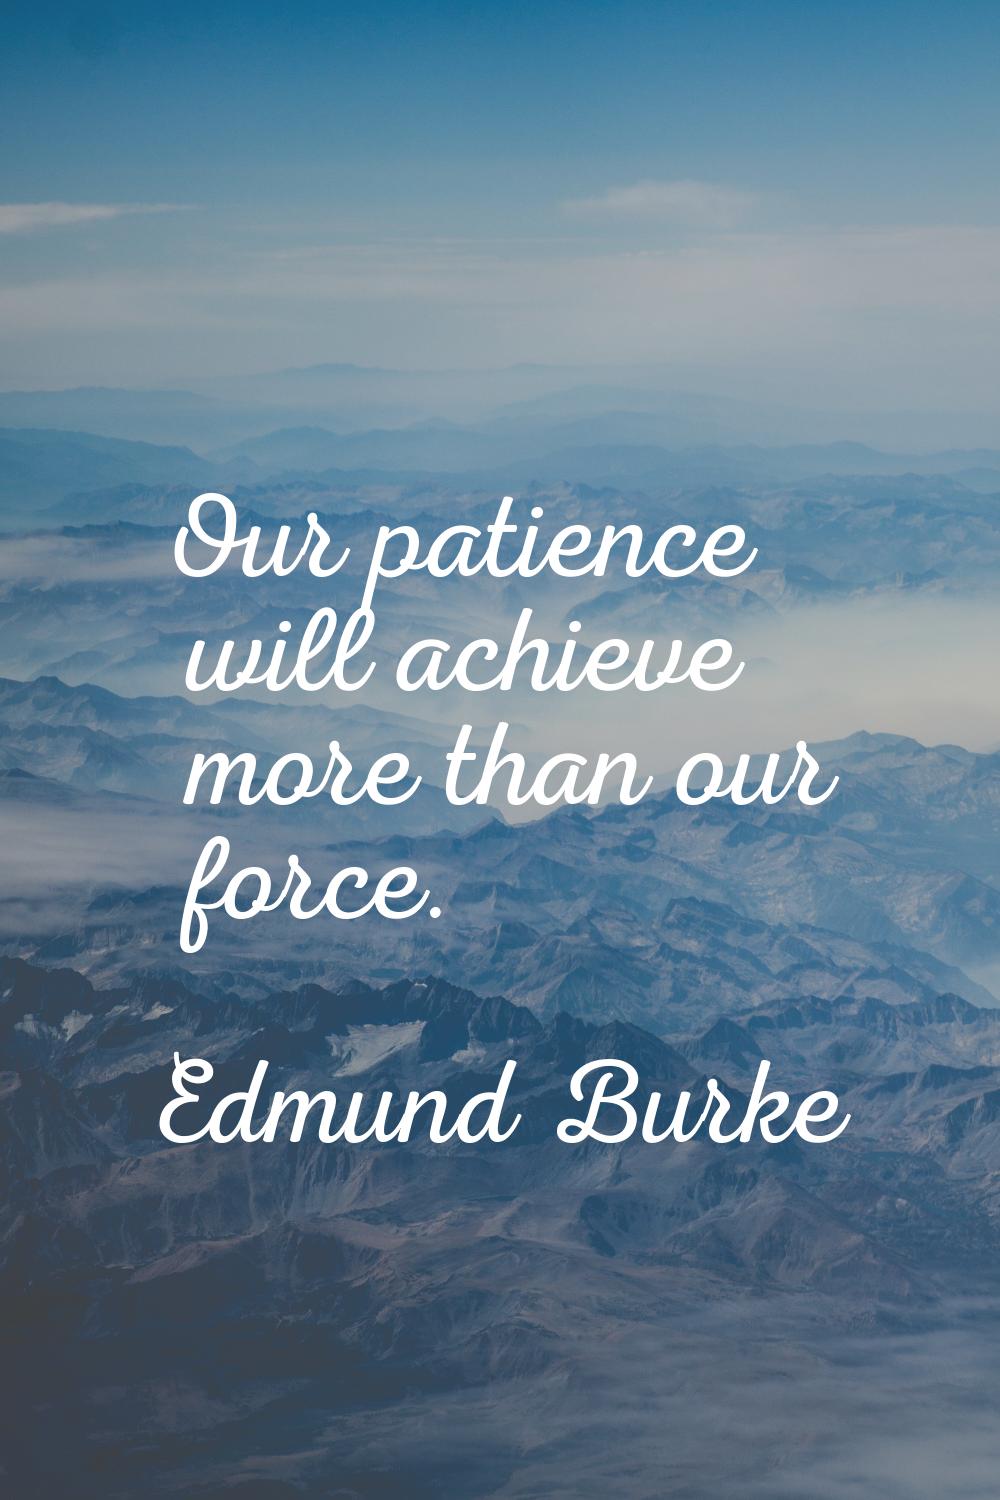 Our patience will achieve more than our force.